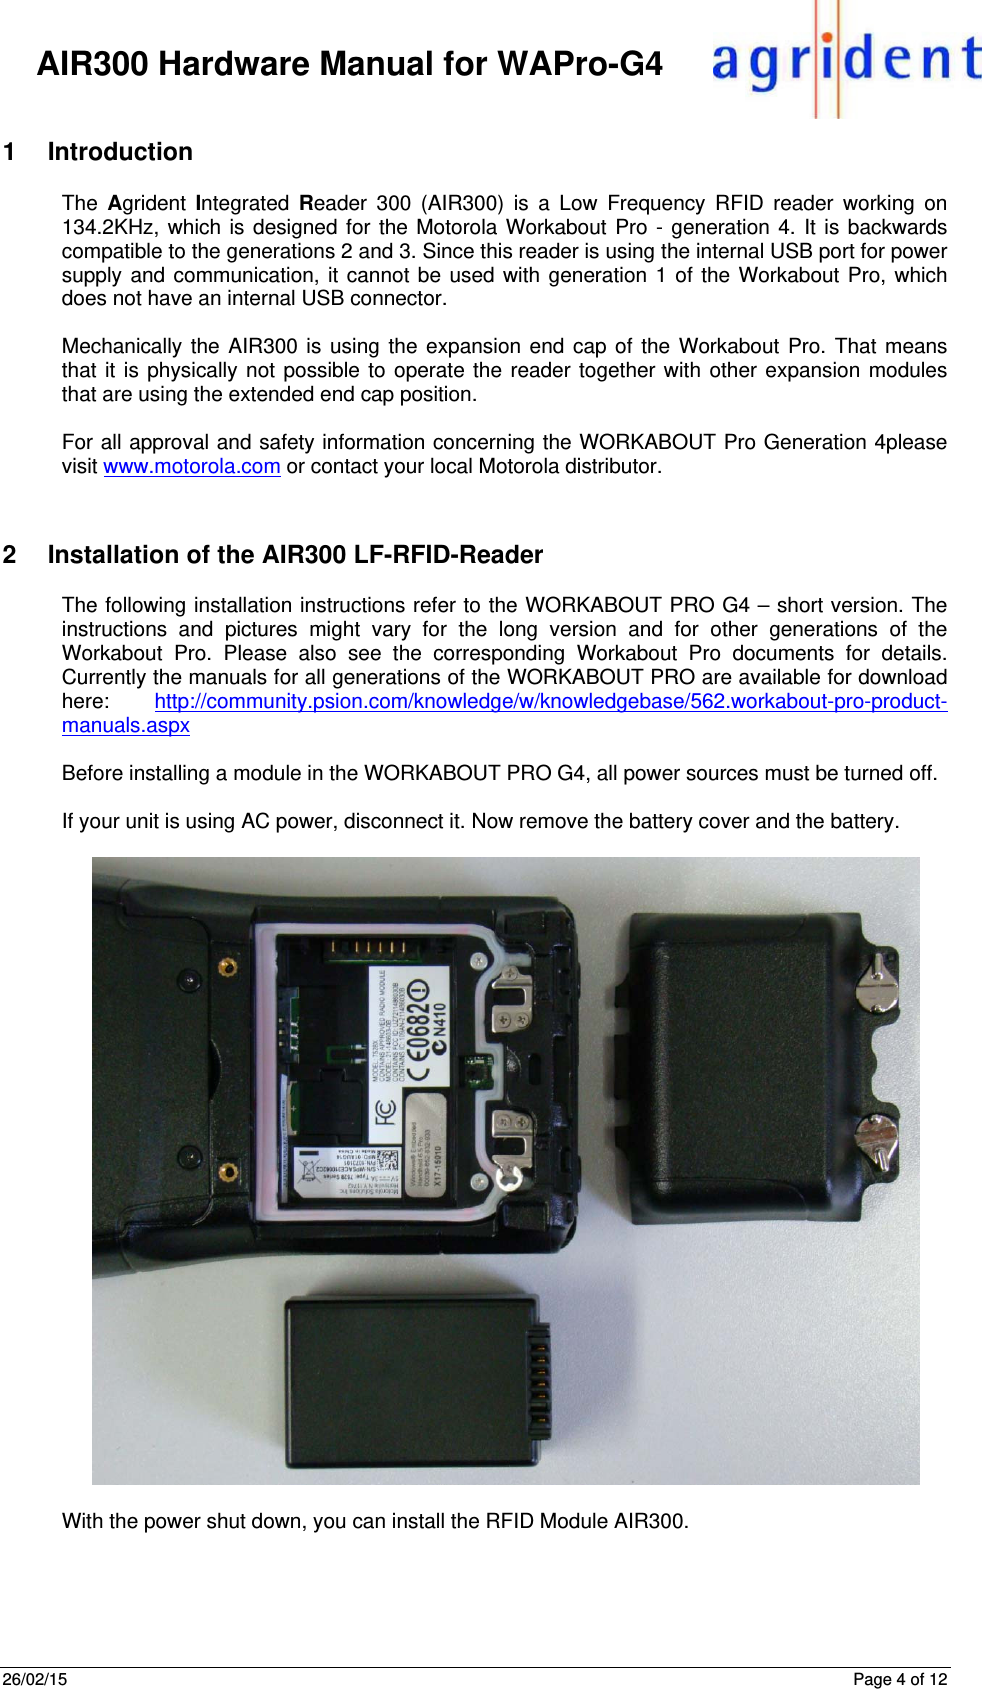 26/02/15      Page 4 of 12     AIR300 Hardware Manual for WAPro-G4 1 Introduction The  Agrident  Integrated  Reader 300 (AIR300) is a Low Frequency RFID reader working on 134.2KHz, which is designed for the Motorola Workabout Pro - generation 4. It is backwards compatible to the generations 2 and 3. Since this reader is using the internal USB port for power supply and communication, it cannot be used with generation 1 of the Workabout Pro, which does not have an internal USB connector.  Mechanically the AIR300 is using the expansion end cap of the Workabout Pro. That means that it is physically not possible to operate the reader together with other expansion modules that are using the extended end cap position.  For all approval and safety information concerning the WORKABOUT Pro Generation 4please visit www.motorola.com or contact your local Motorola distributor.  2  Installation of the AIR300 LF-RFID-Reader The following installation instructions refer to the WORKABOUT PRO G4 – short version. The instructions and pictures might vary for the long version and for other generations of the Workabout Pro. Please also see the corresponding Workabout Pro documents for details. Currently the manuals for all generations of the WORKABOUT PRO are available for download here:  http://community.psion.com/knowledge/w/knowledgebase/562.workabout-pro-product-manuals.aspx  Before installing a module in the WORKABOUT PRO G4, all power sources must be turned off.   If your unit is using AC power, disconnect it. Now remove the battery cover and the battery.     With the power shut down, you can install the RFID Module AIR300.    